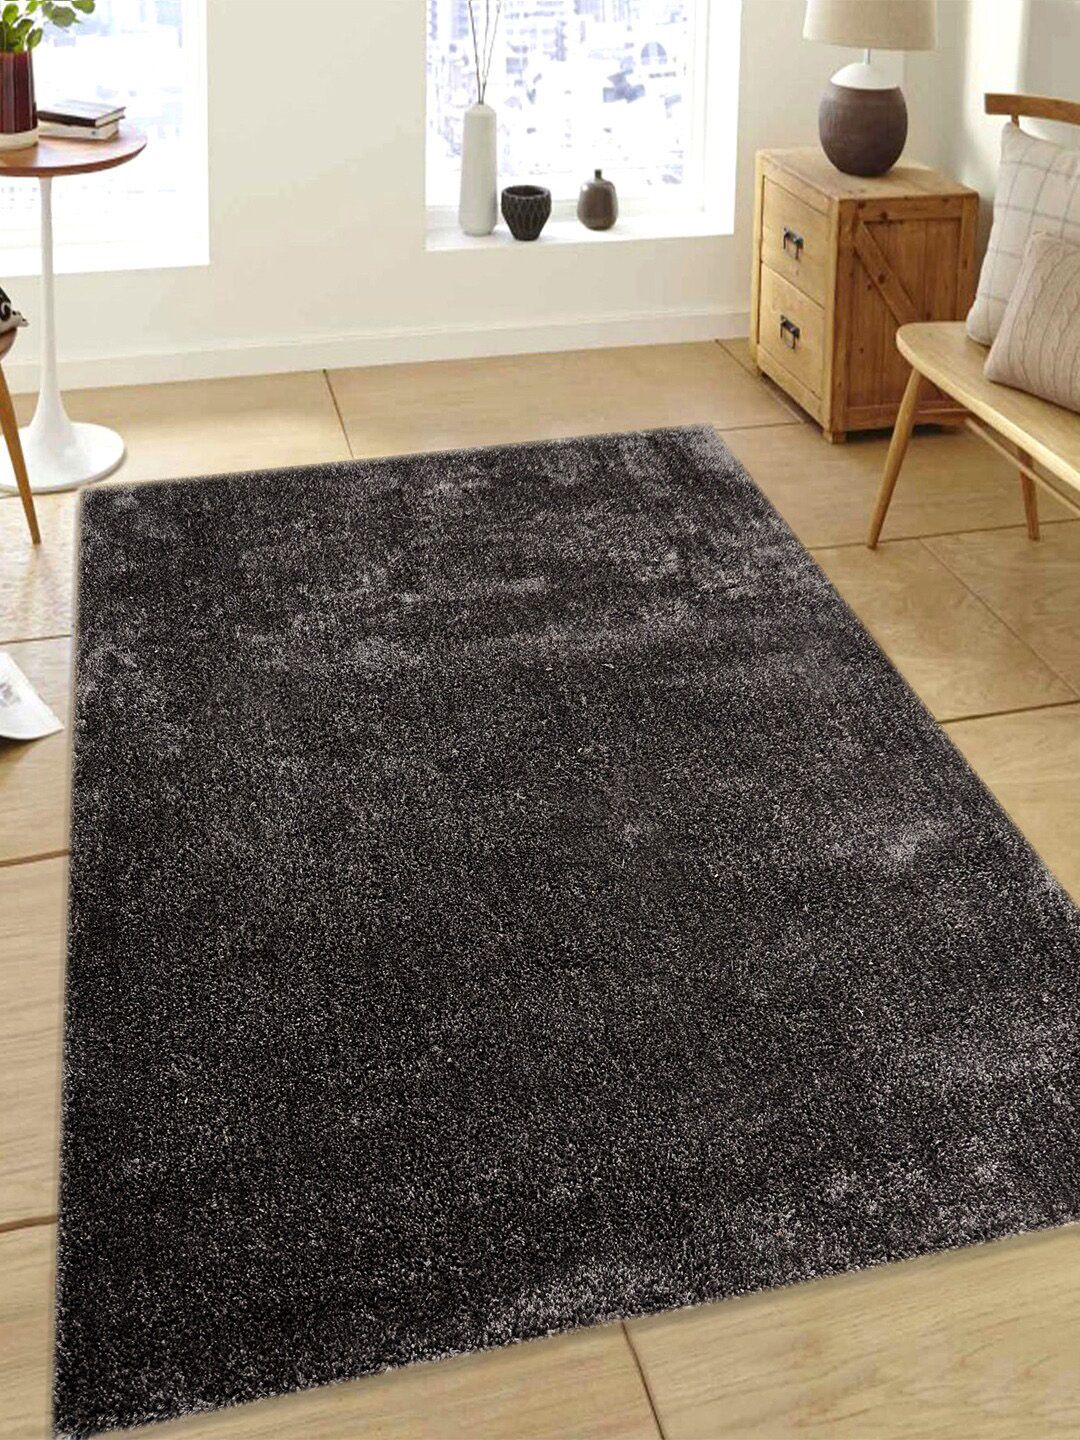 Saral Home Grey Solid Cotton Shaggy Carpet Price in India